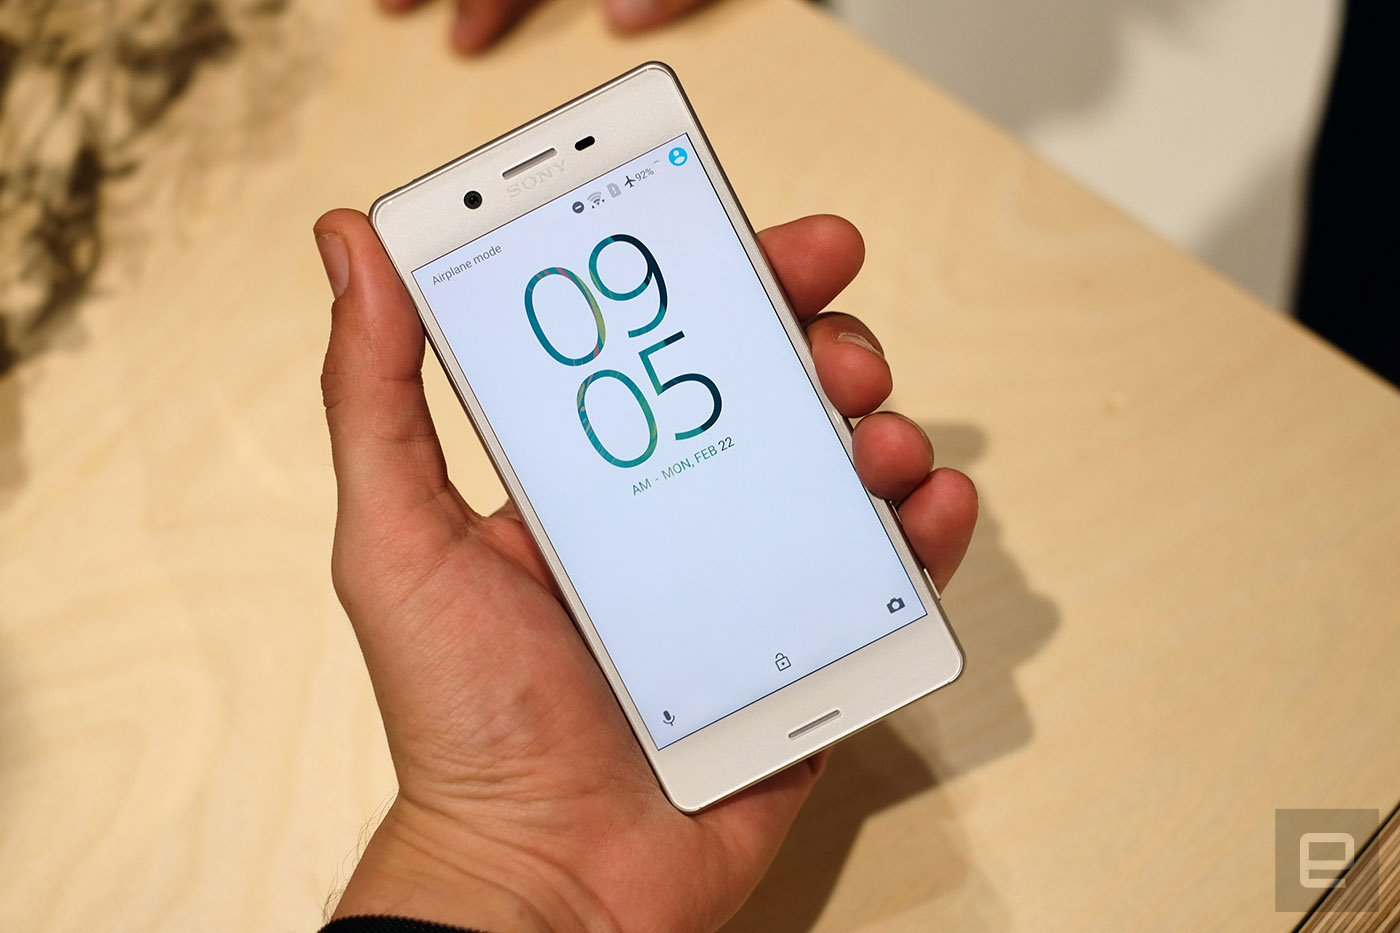 Sony focuses on the camera with its Xperia X lineup